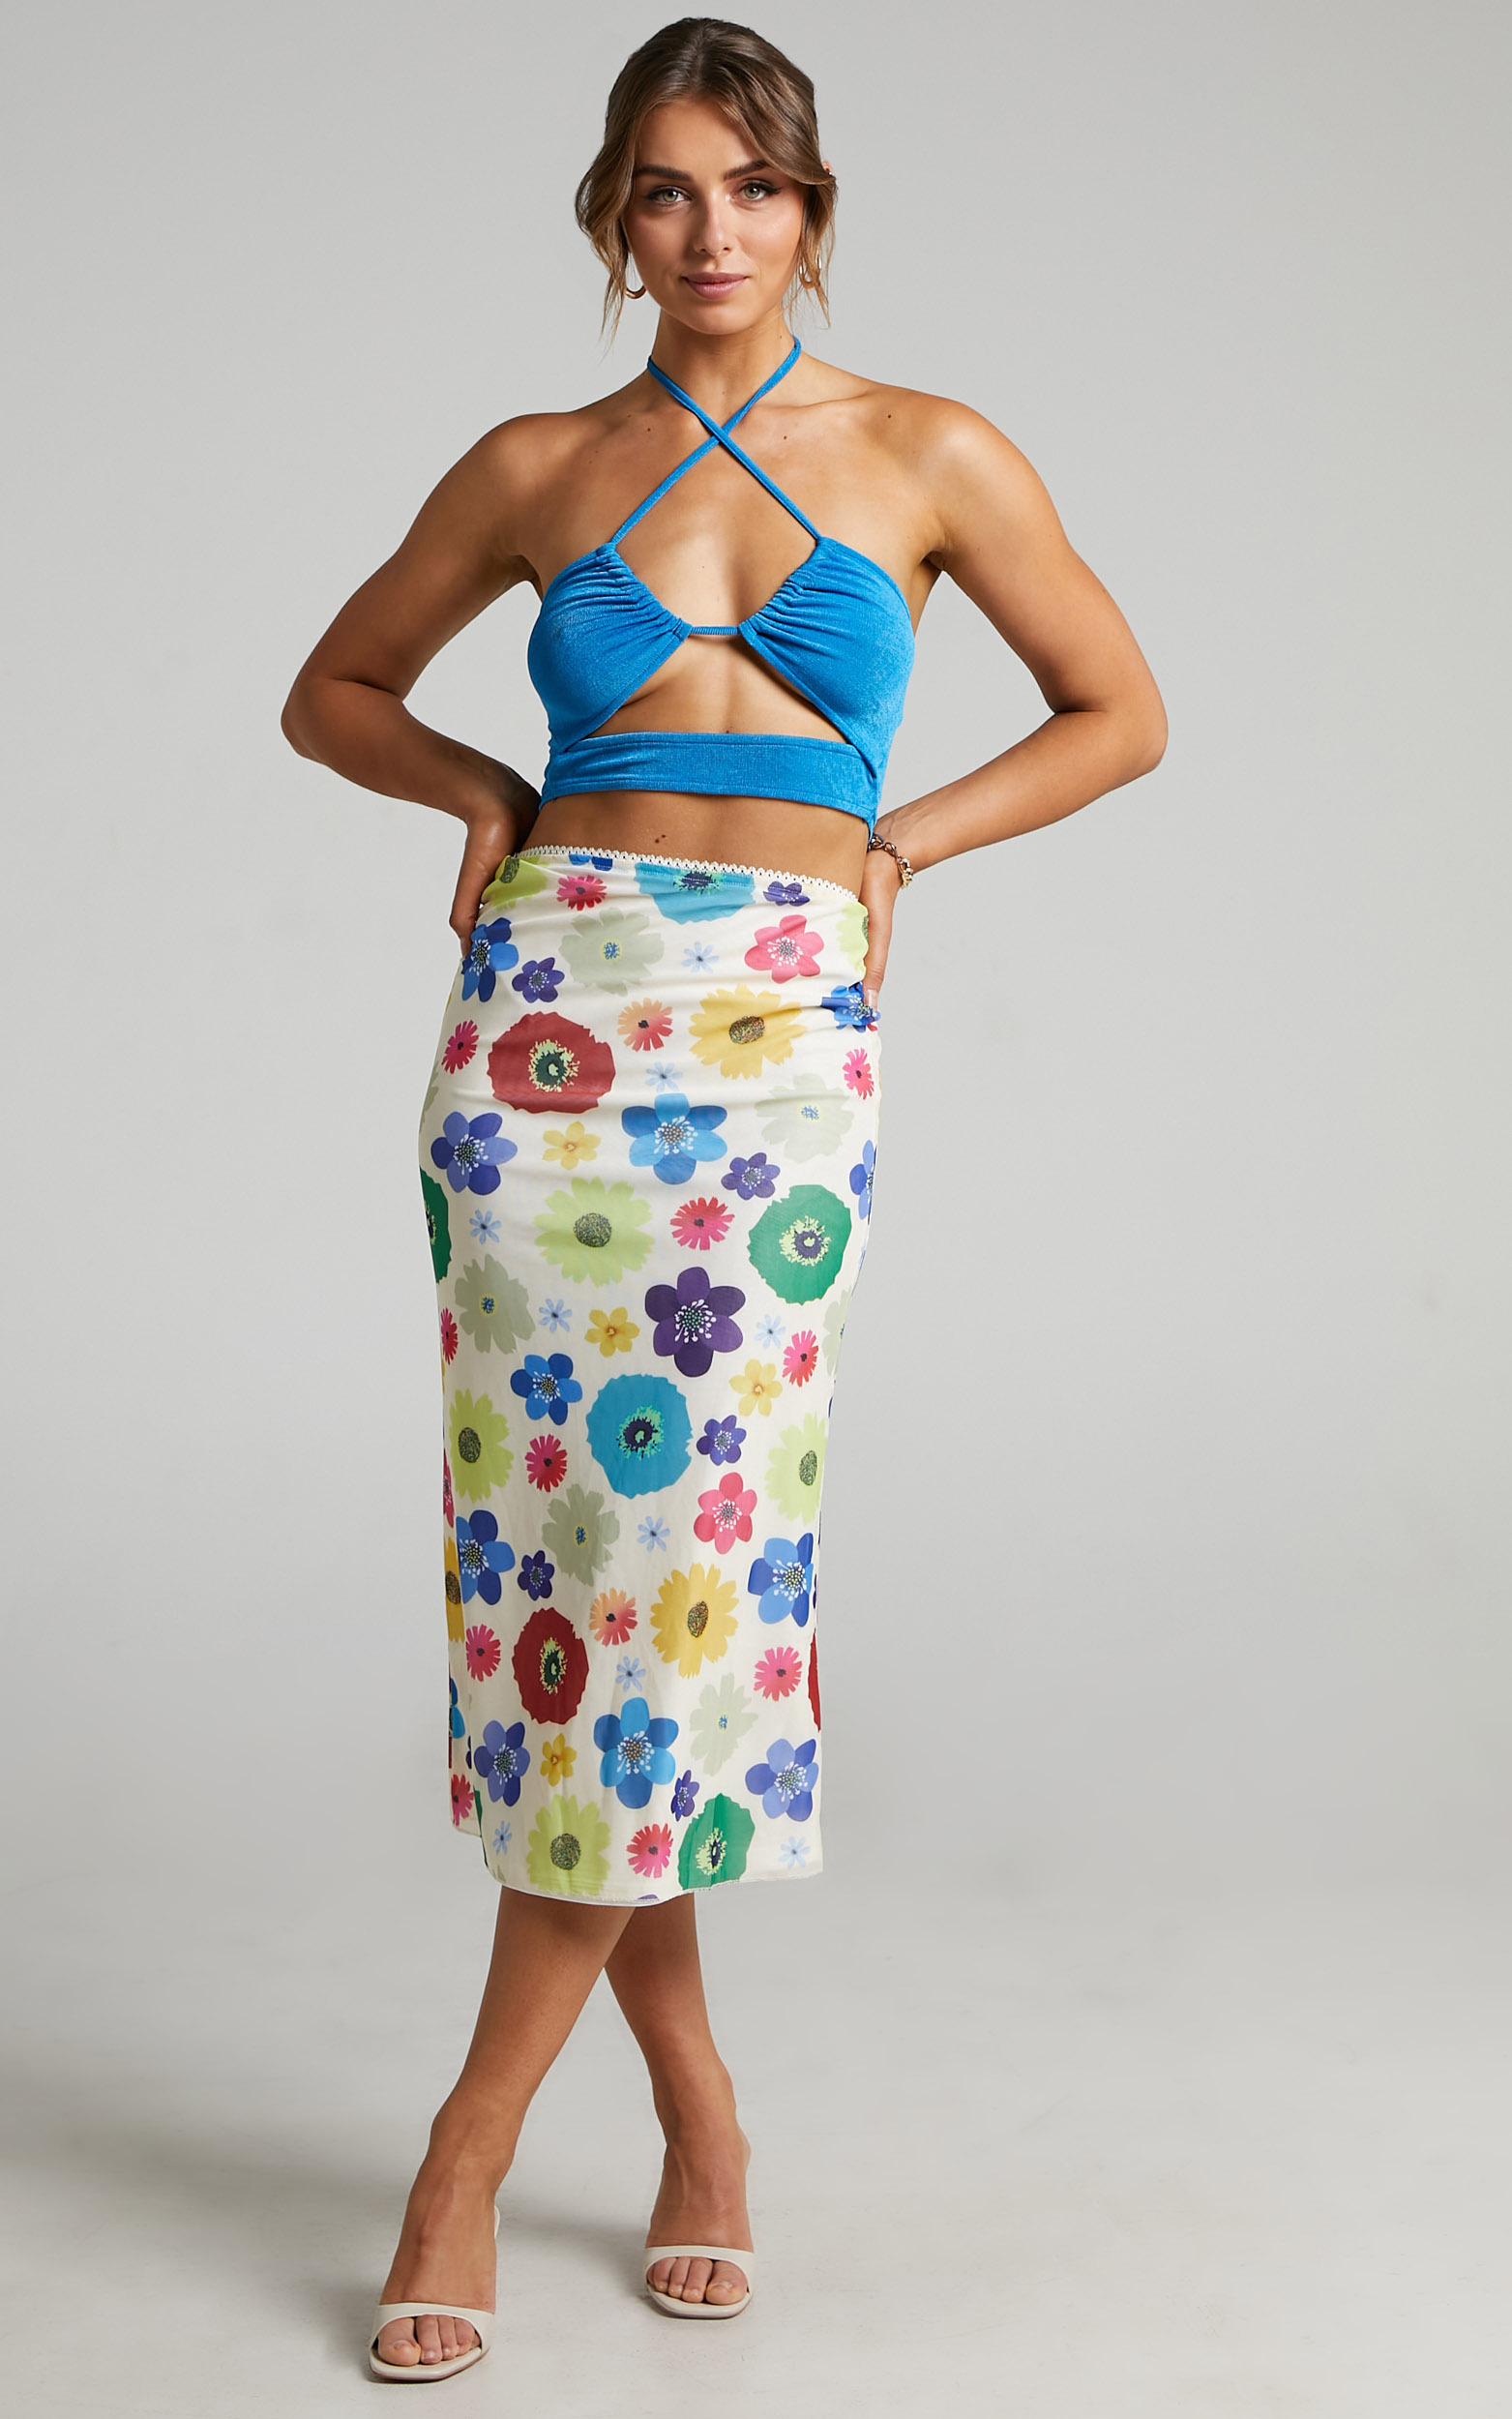 Leontine Cropped Cut out Halter Top with ties in Blue - 06, BLU1, hi-res image number null